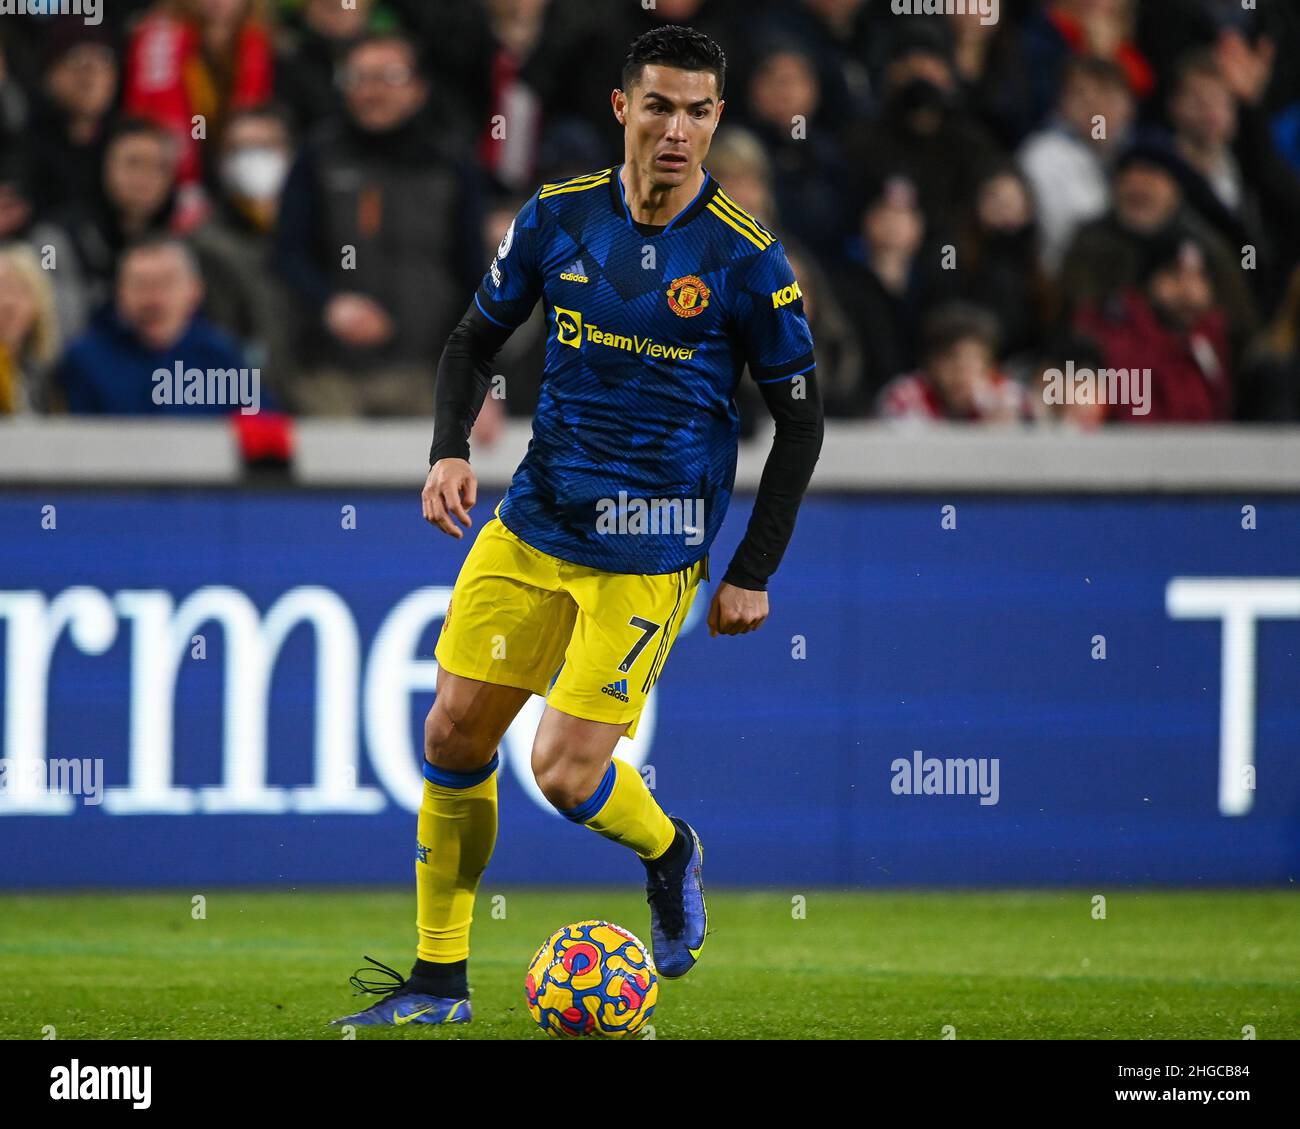 Cristiano Ronaldo #7 of Manchester United makes a break with the ball in, on 1/19/2022. (Photo by Craig Thomas/News Images/Sipa USA) Credit: Sipa USA/Alamy Live News Stock Photo